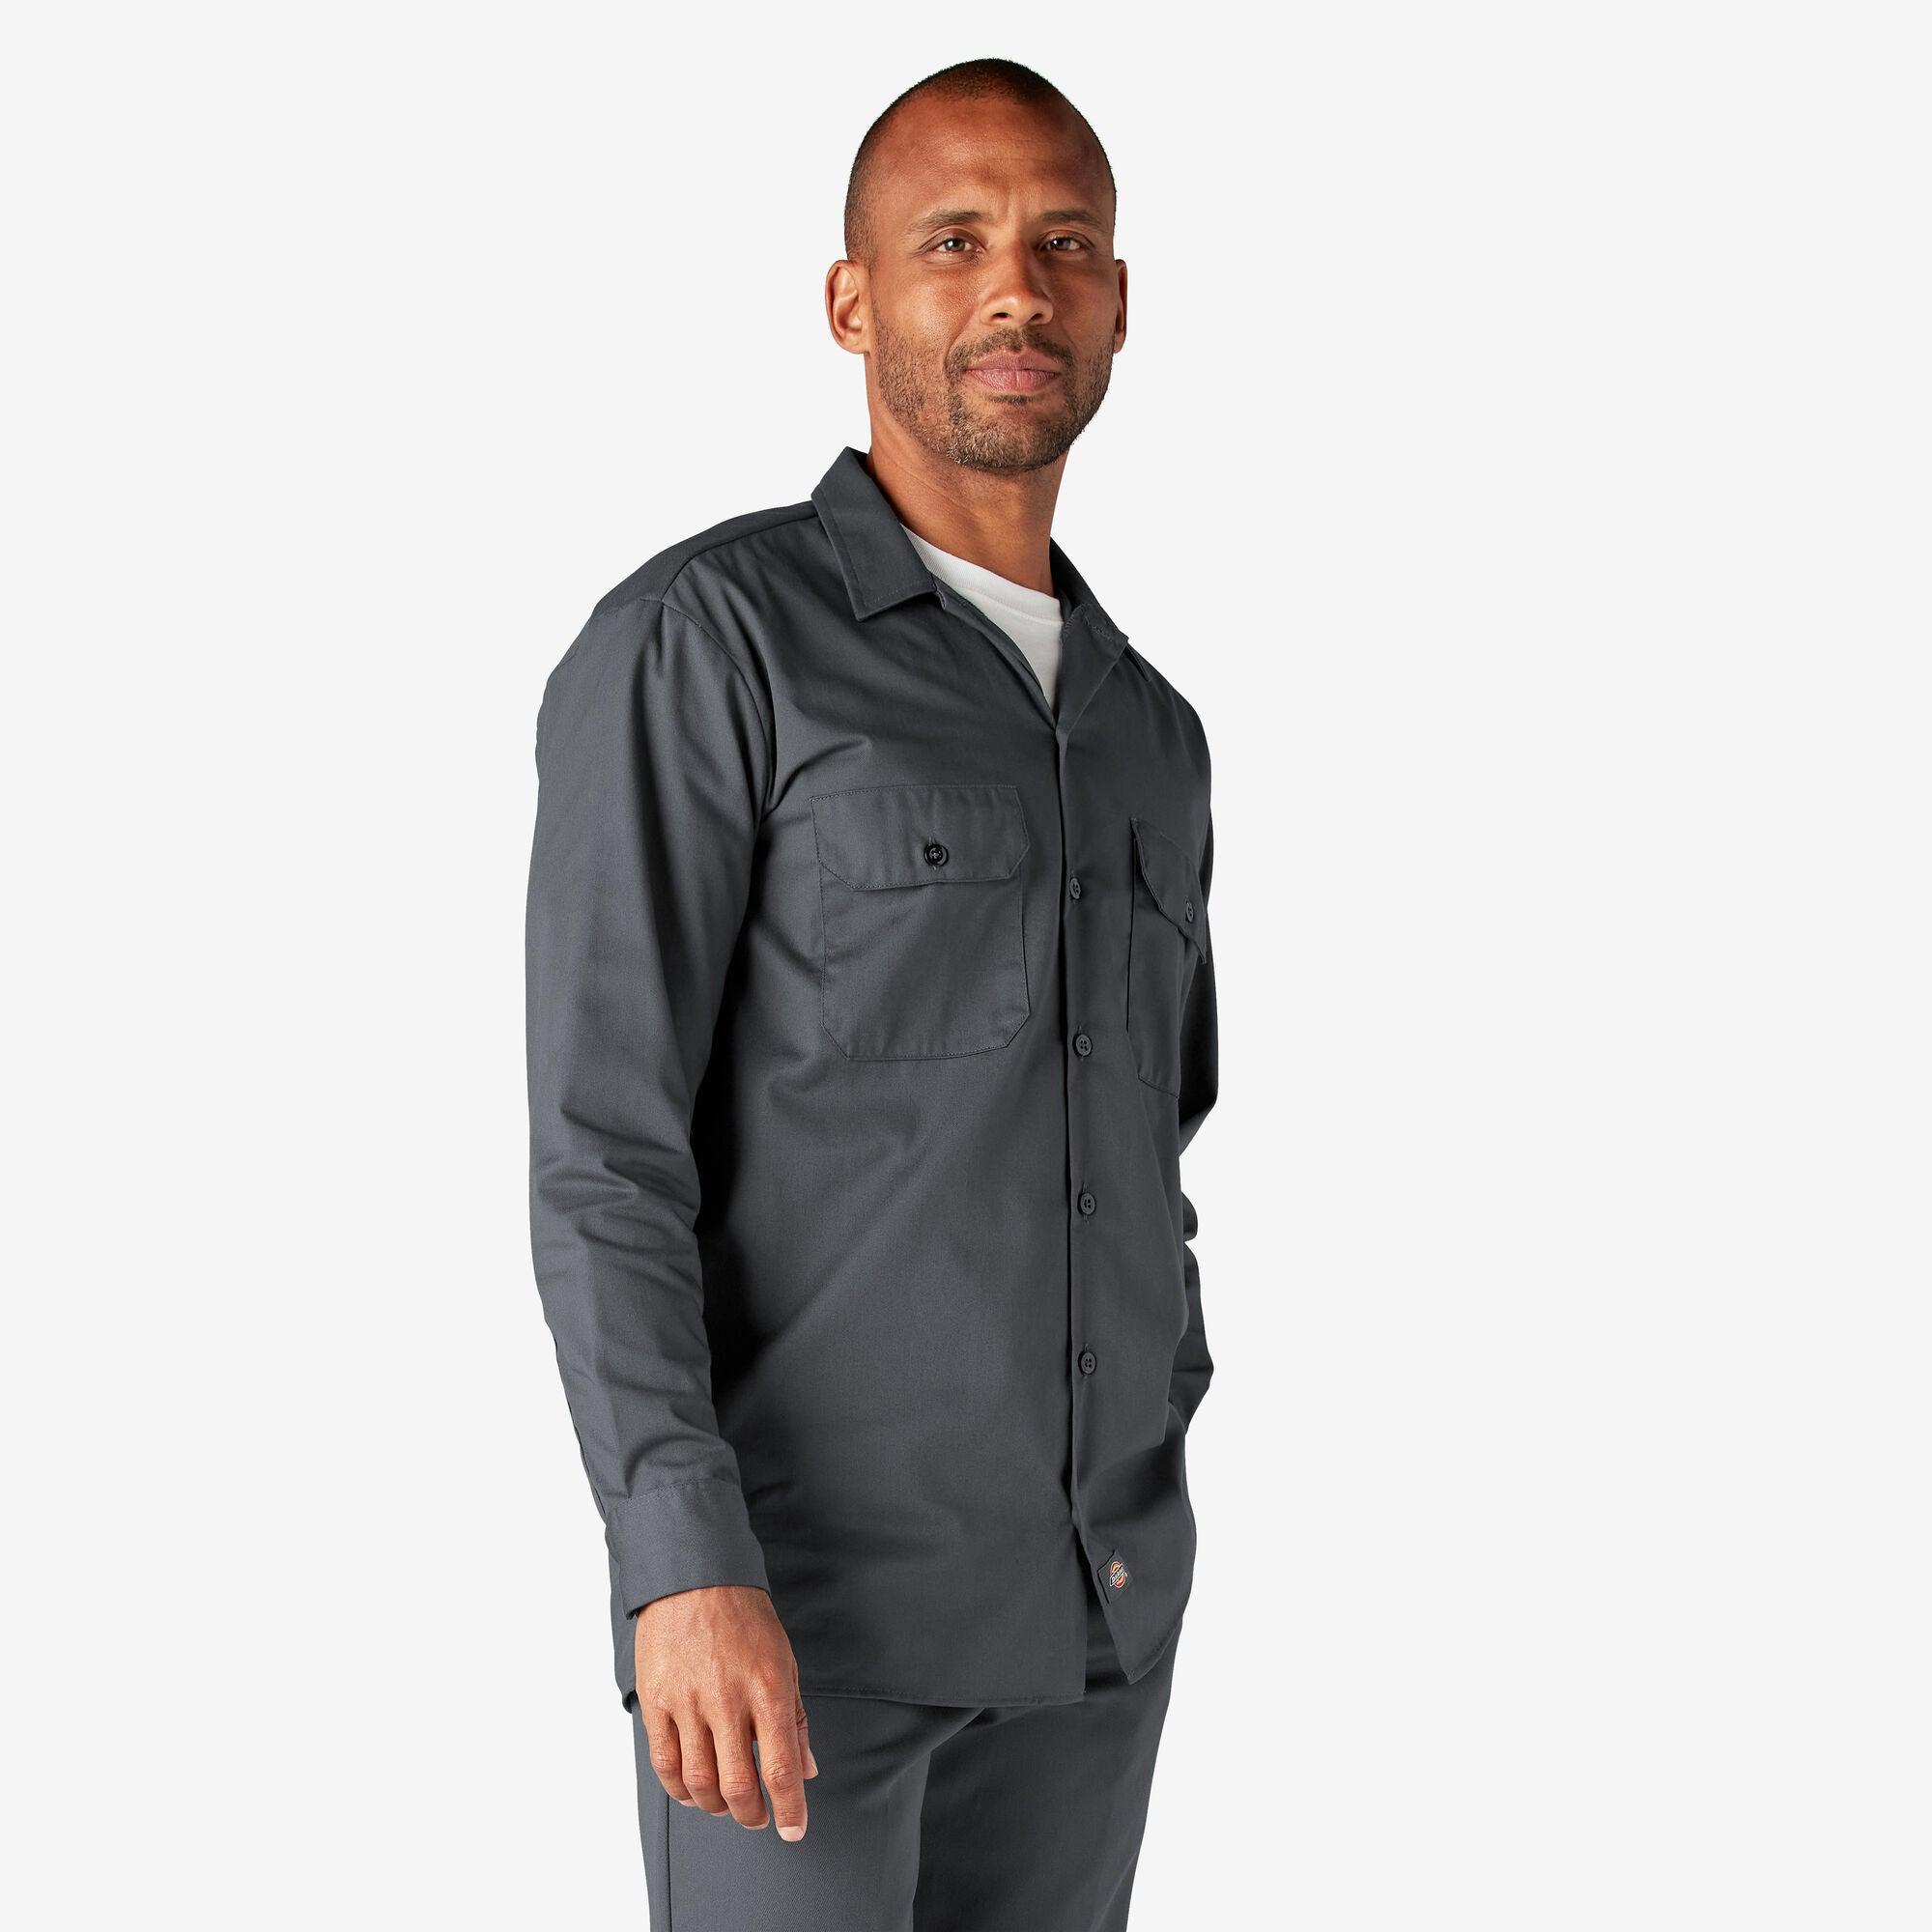 Long Sleeve Work Shirt, Charcoal Gray - Purpose-Built / Home of the Trades